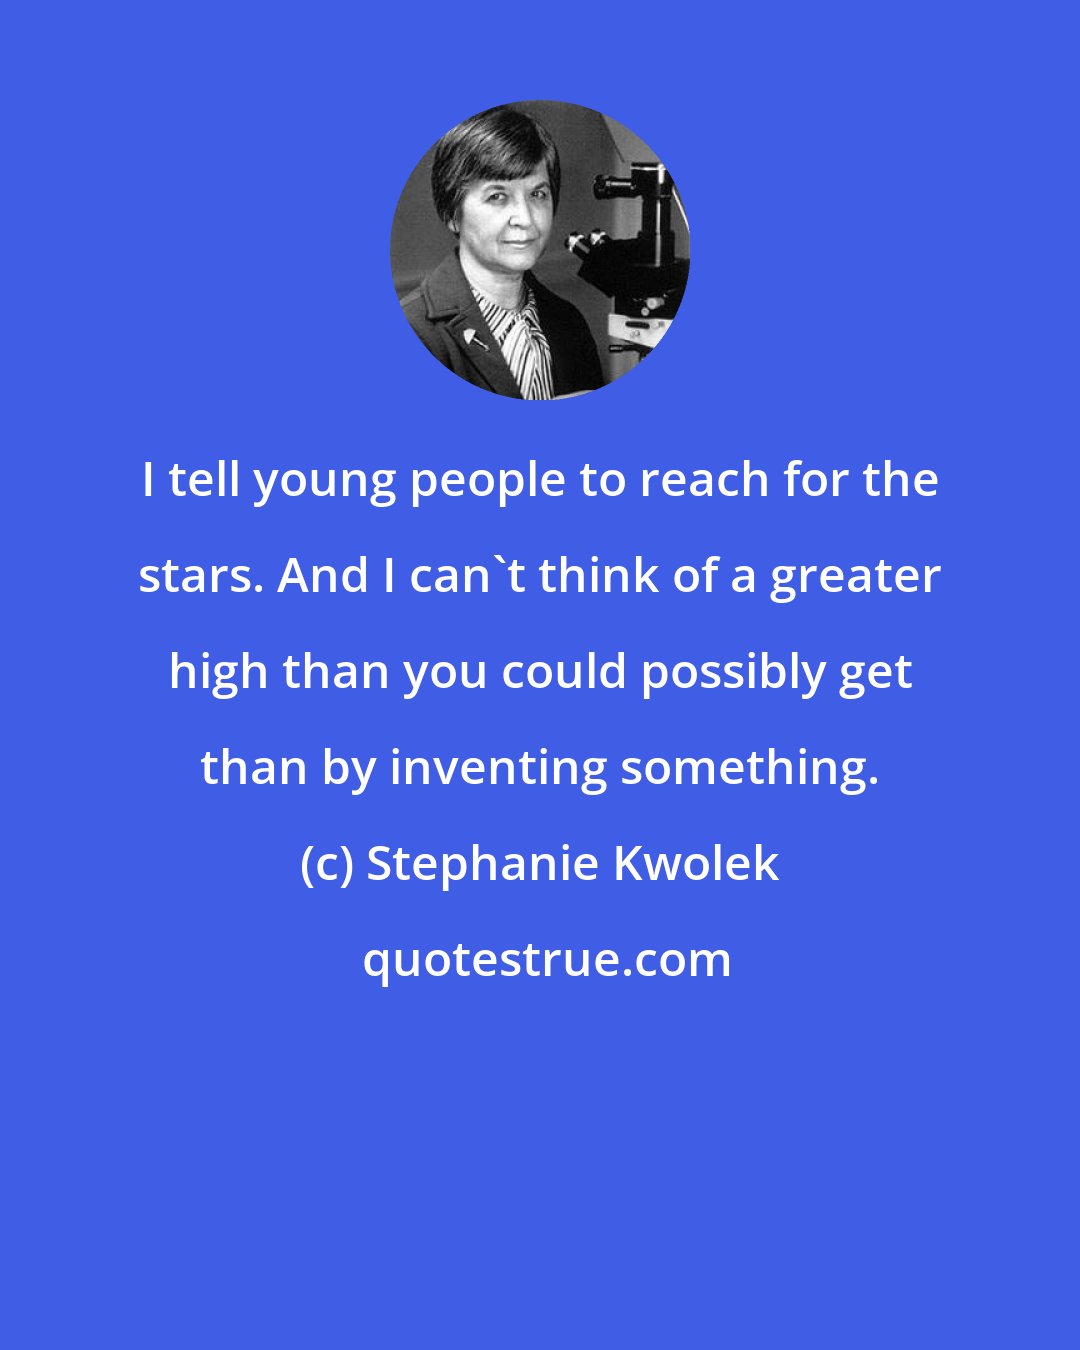 Stephanie Kwolek: I tell young people to reach for the stars. And I can't think of a greater high than you could possibly get than by inventing something.